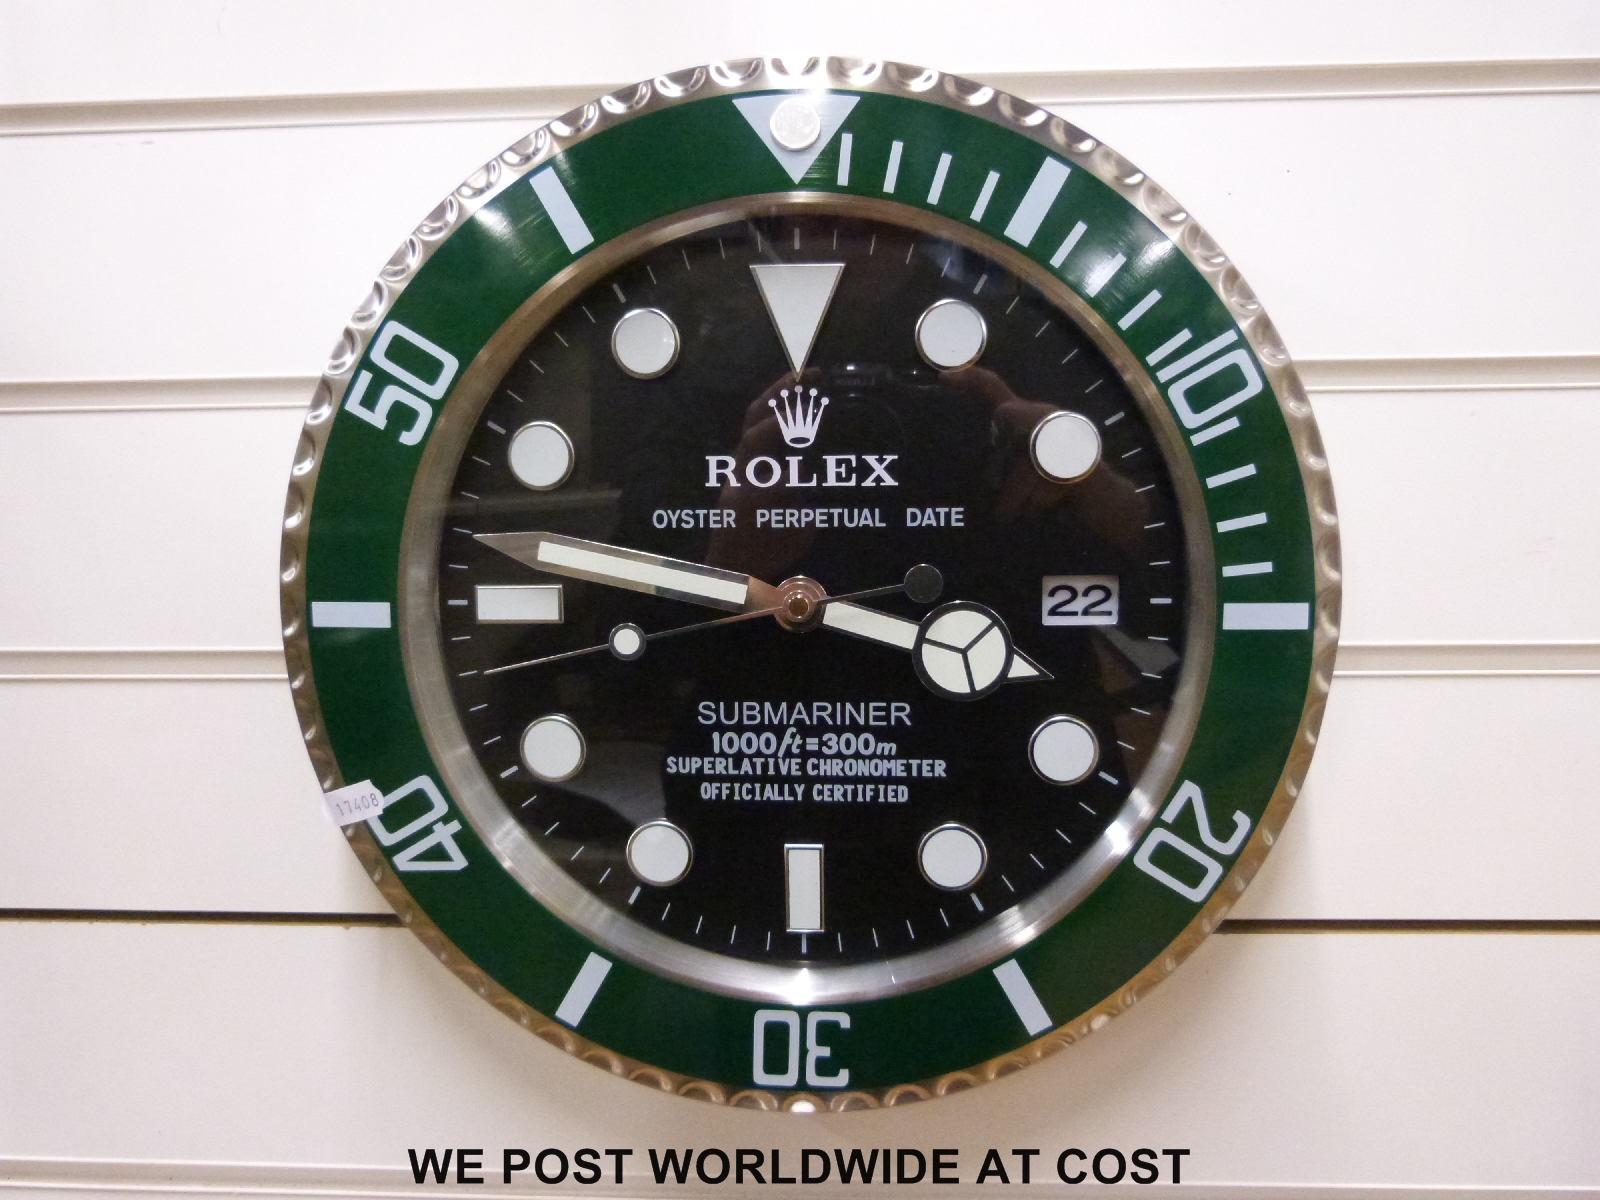 Rolex advertising clock green Submariner style with date, - Image 2 of 2